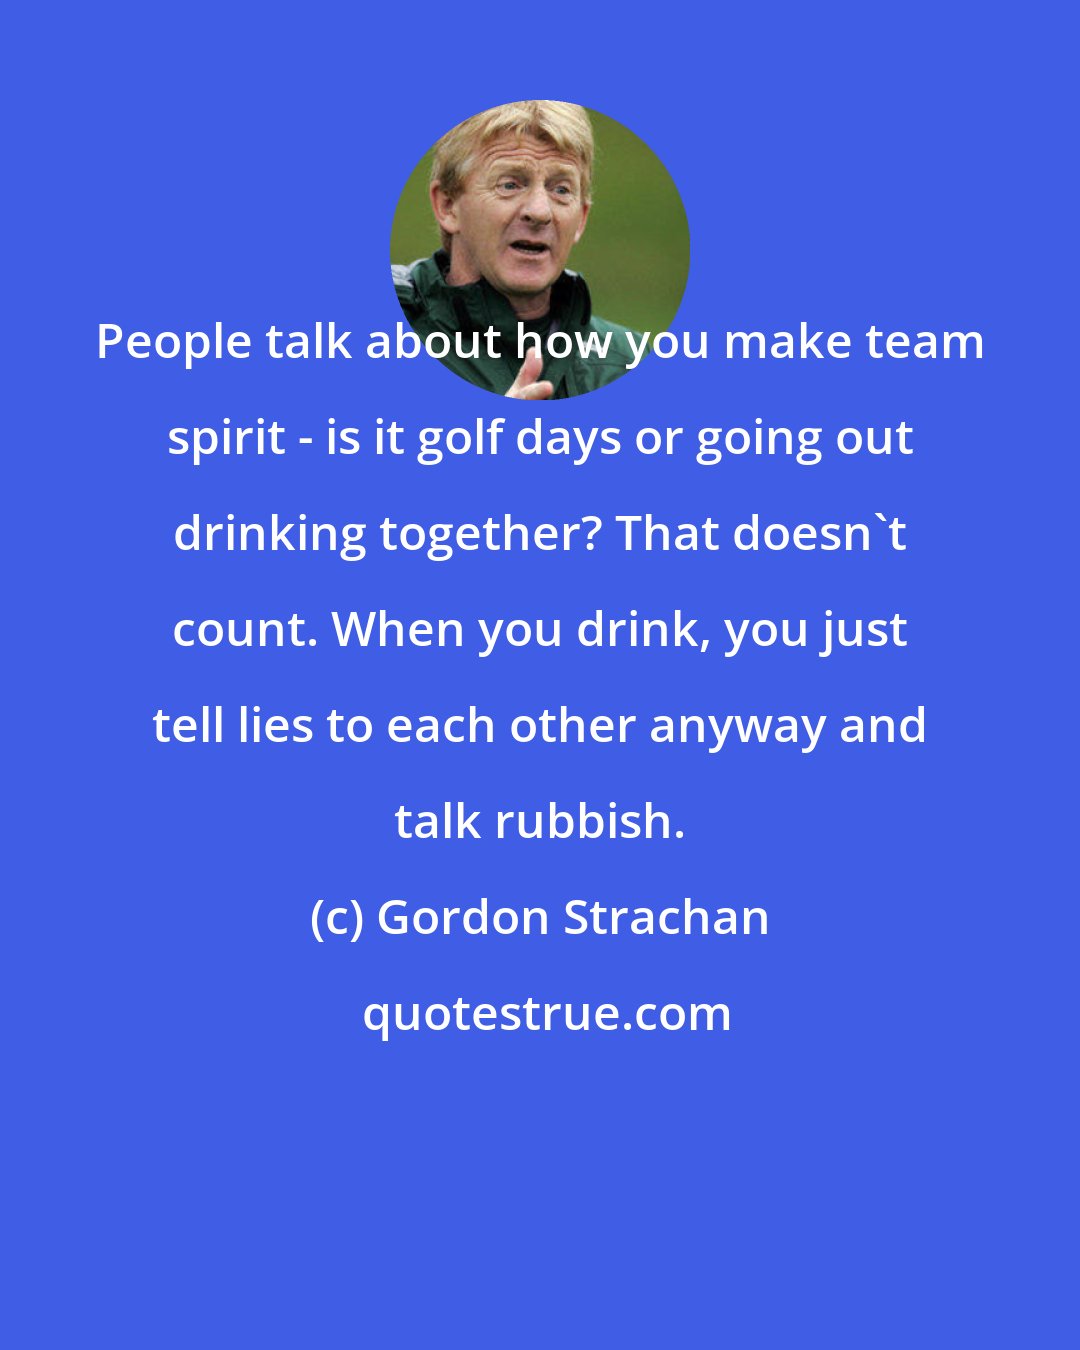 Gordon Strachan: People talk about how you make team spirit - is it golf days or going out drinking together? That doesn't count. When you drink, you just tell lies to each other anyway and talk rubbish.